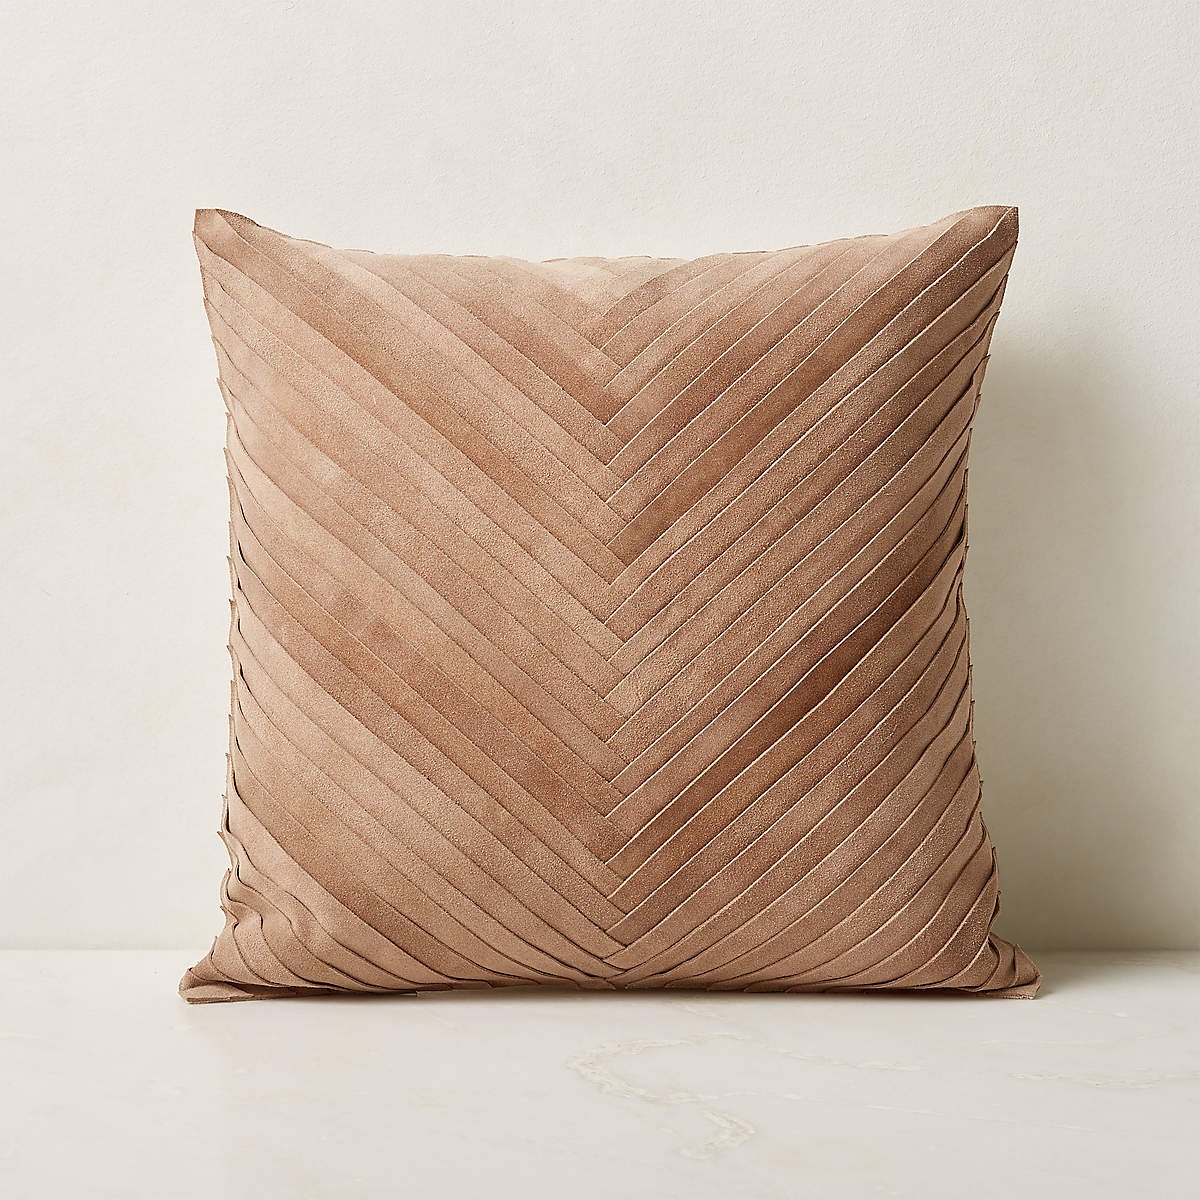 Hari Neutral Woven Suede Pillow with Pleats